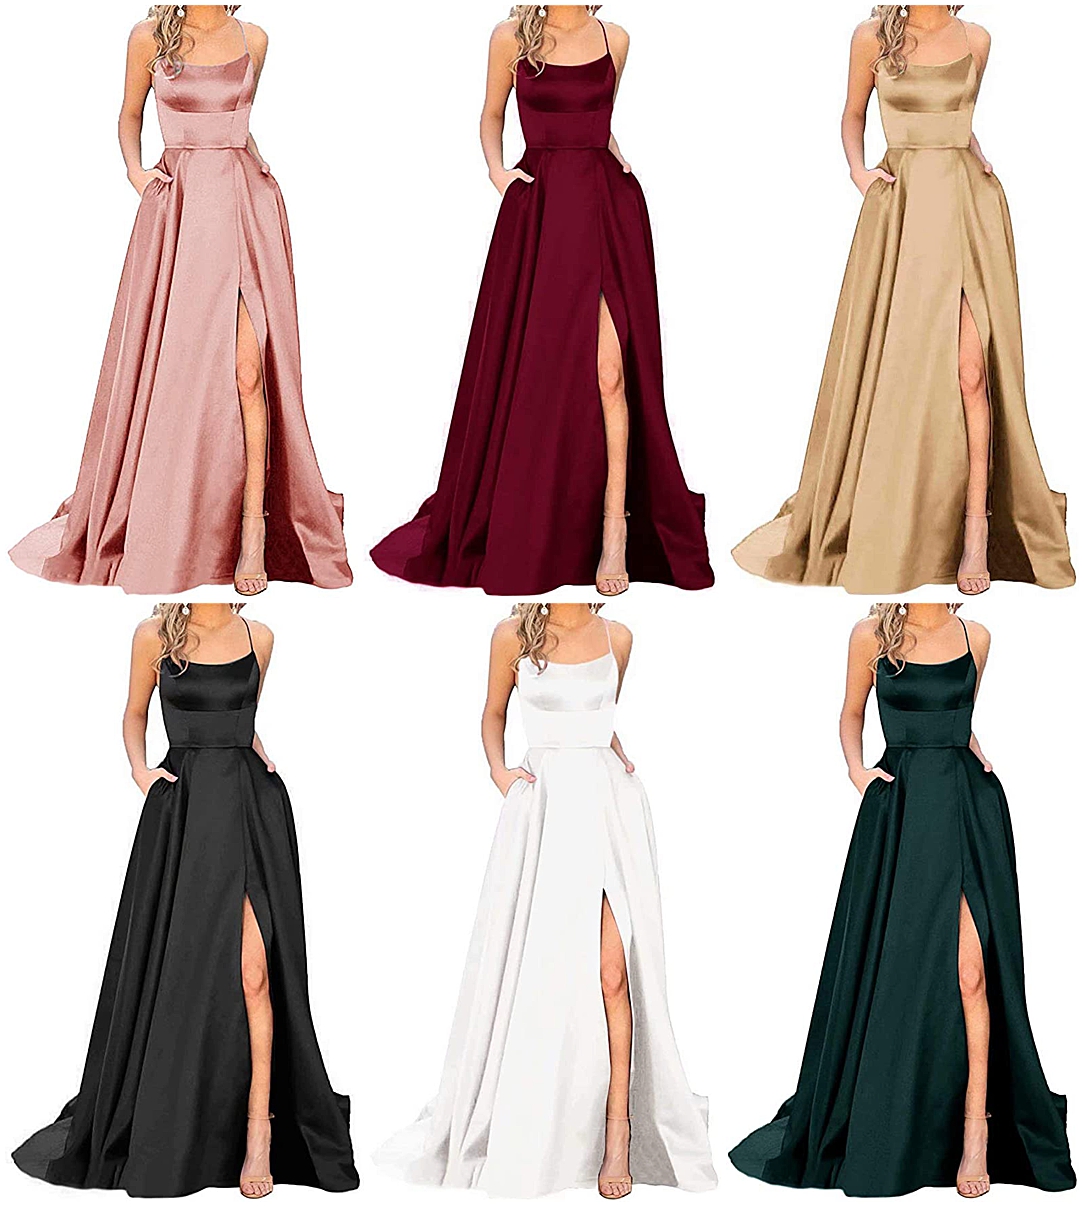 Engagement Session Dresses from Amazon plus tips and tricks on What to wear for your session 0003